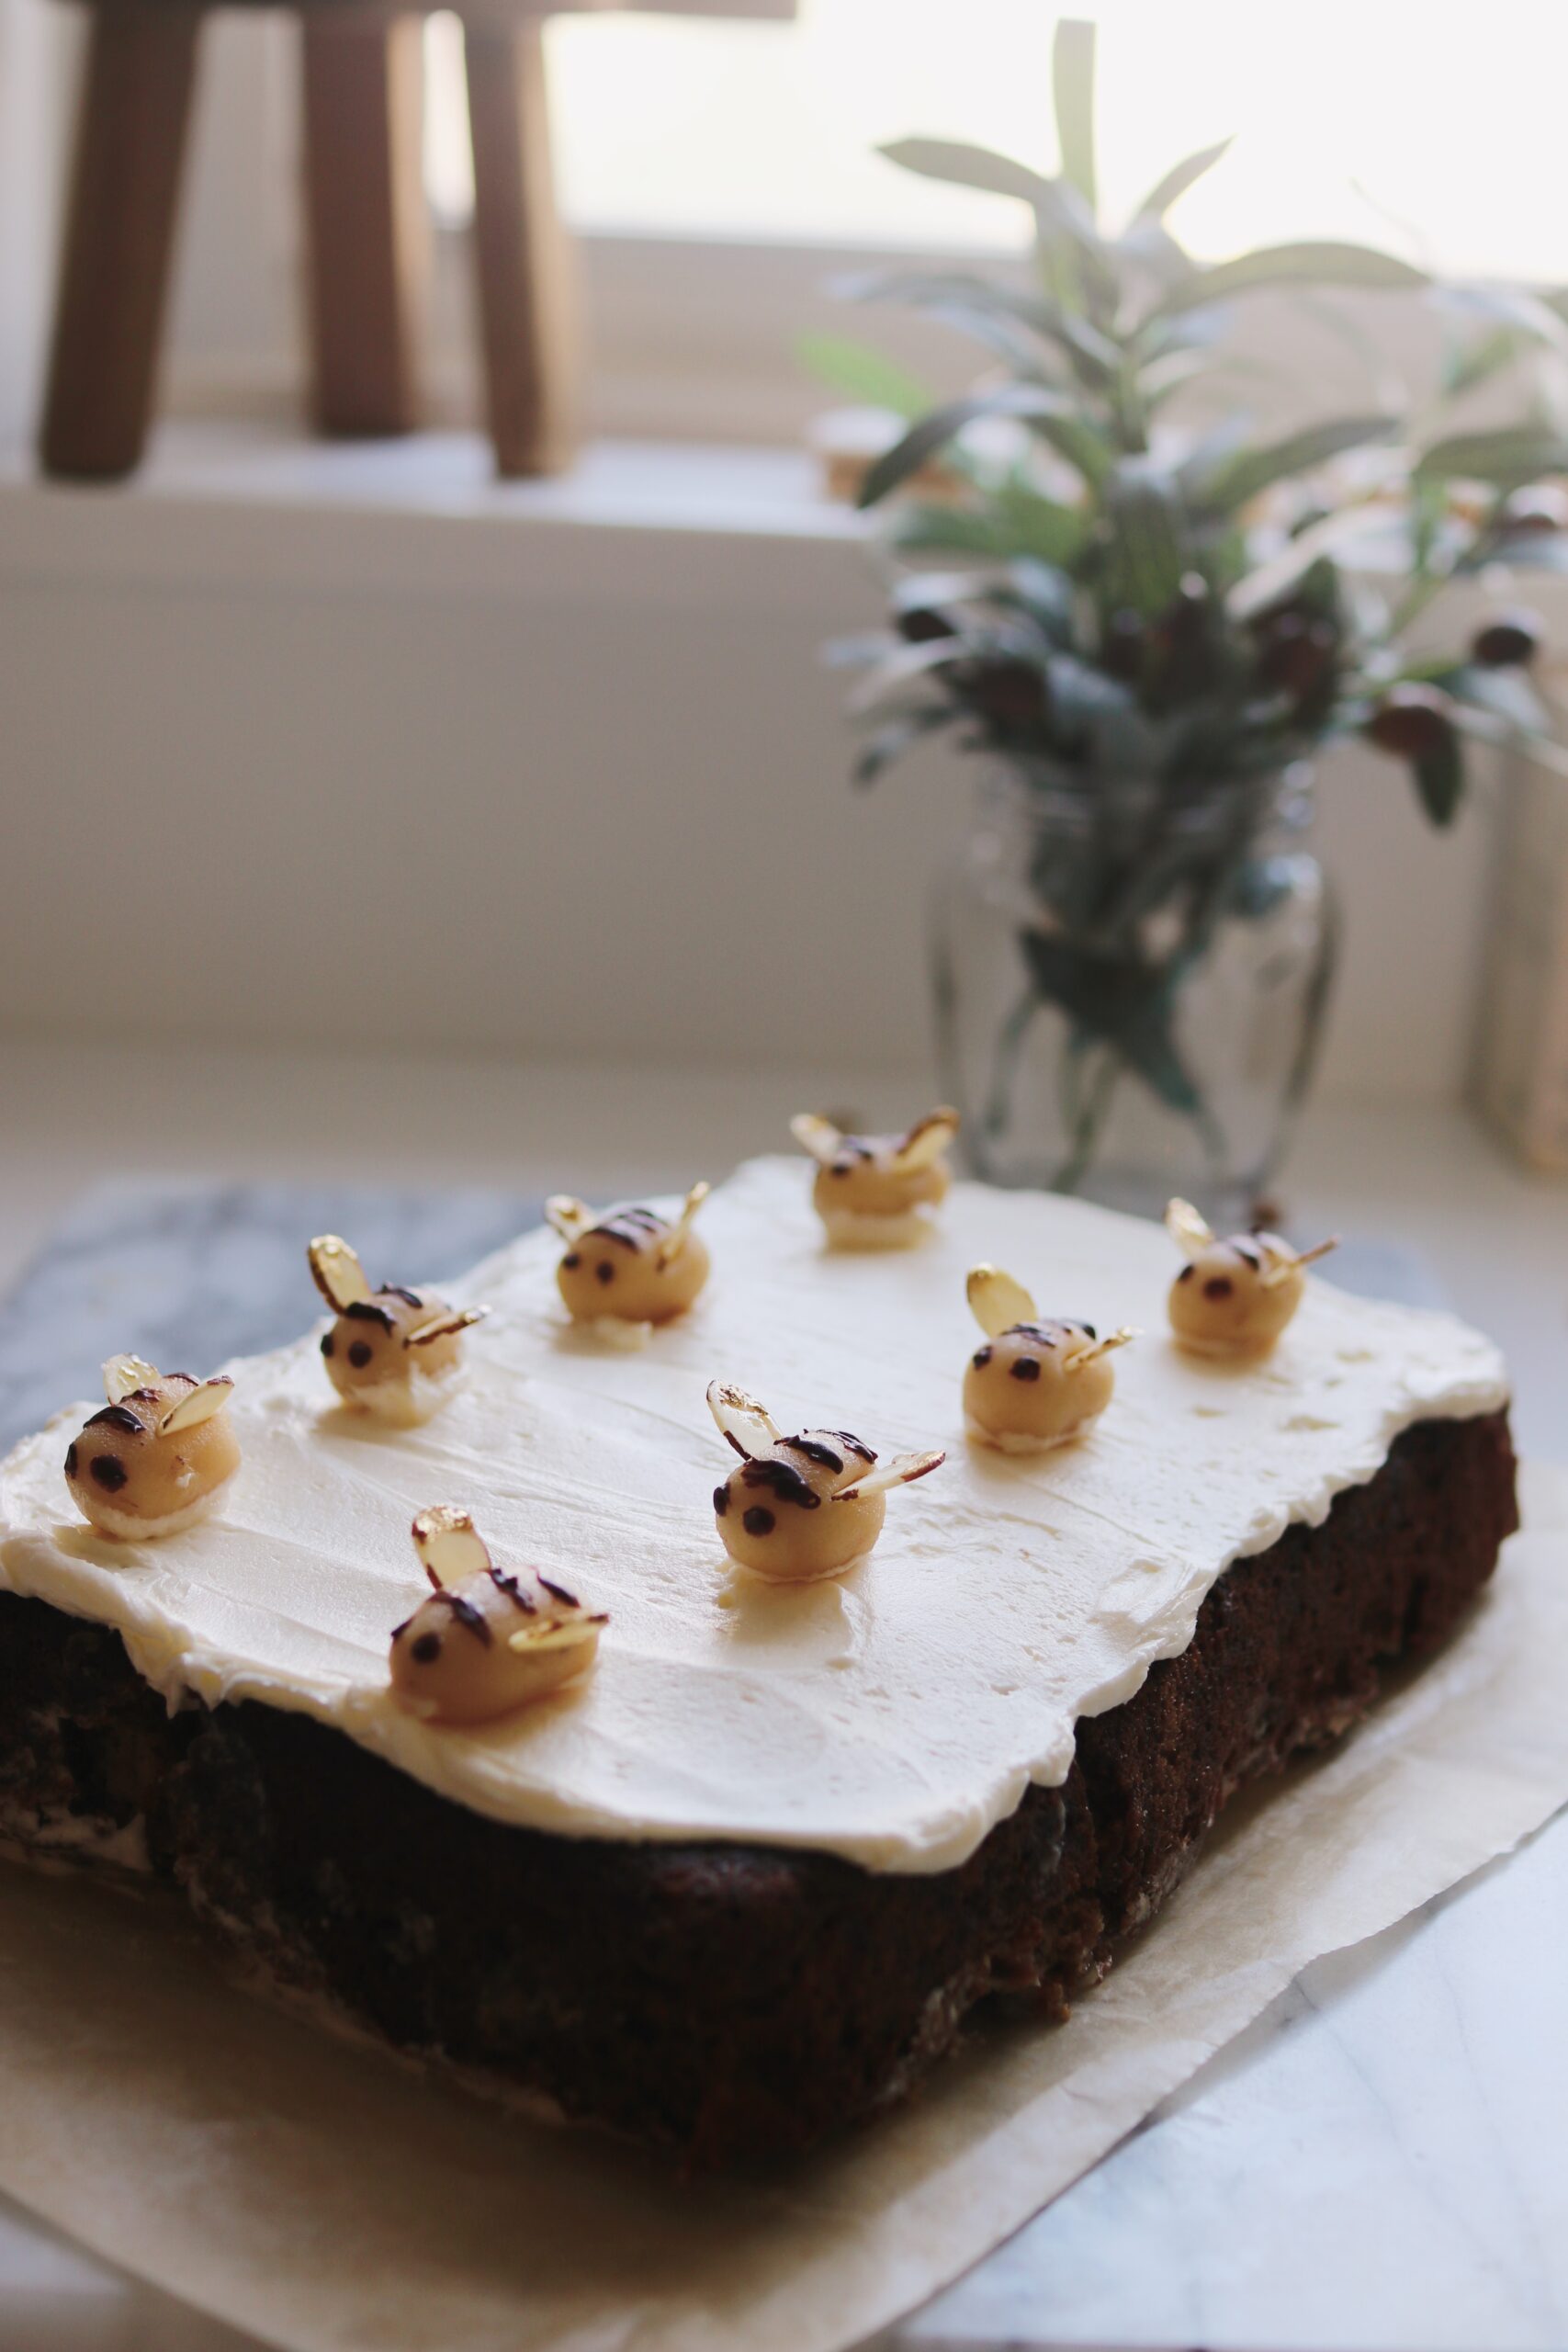 One-Bowl Apple Spice Cake with Marzipan Honey Bees